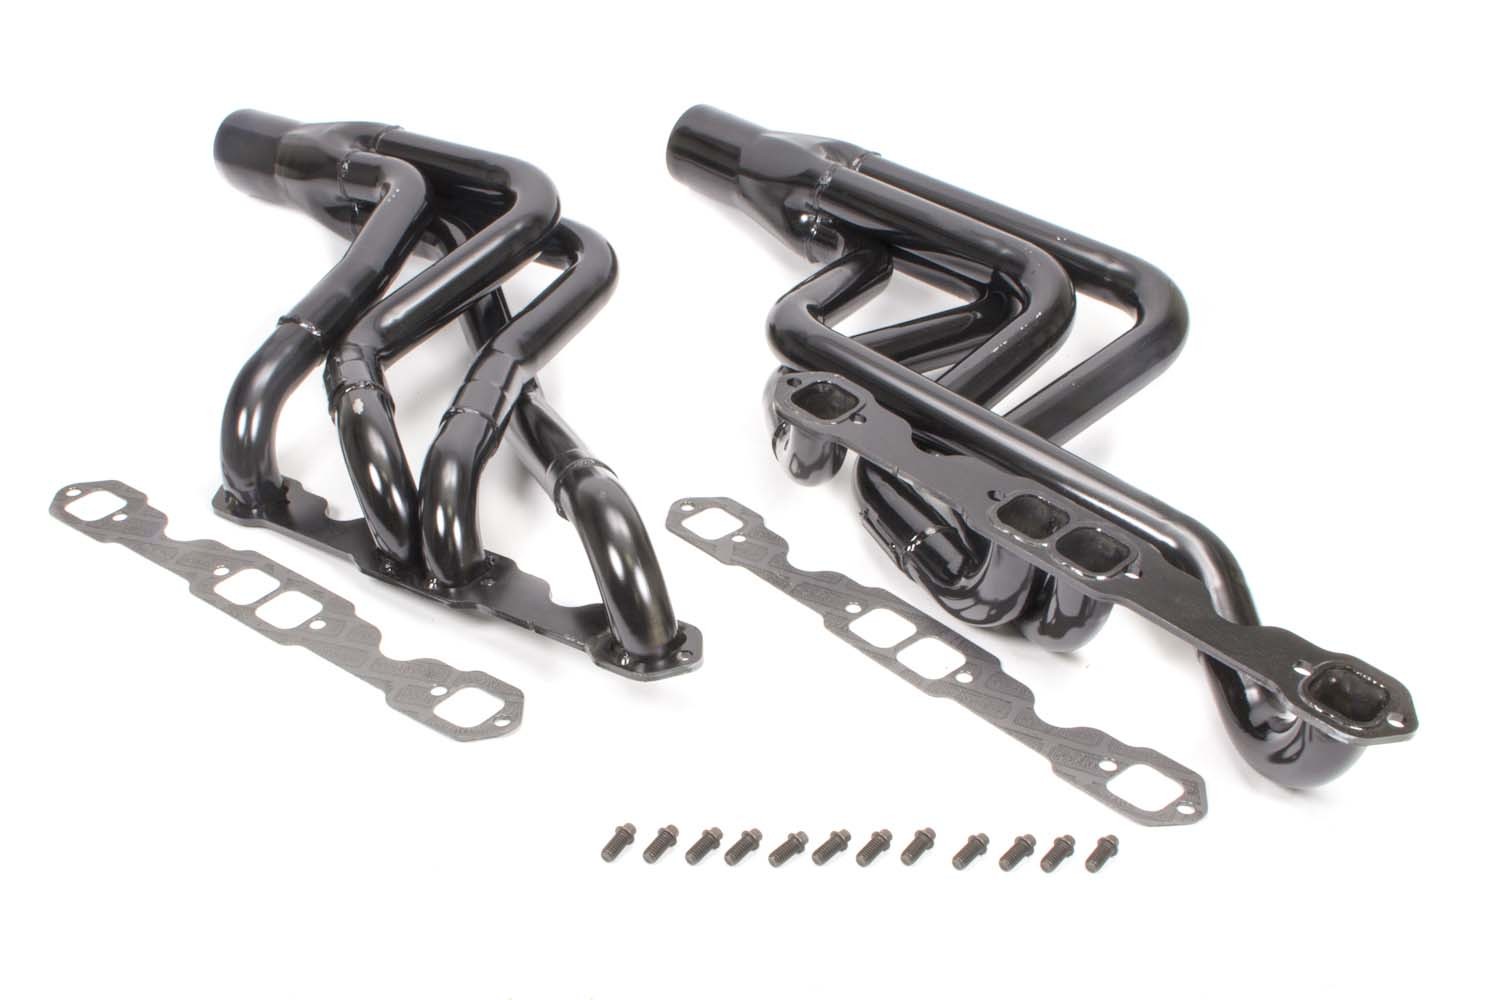 Schoenfeld Headers 165V Headers, Street Stock, 1-5/8 to 1-3/4 in Primary, 3 in Collector, Steel, Black Paint, Small Block Chevy, GM A-Body / F-Body / X-Body, Pair